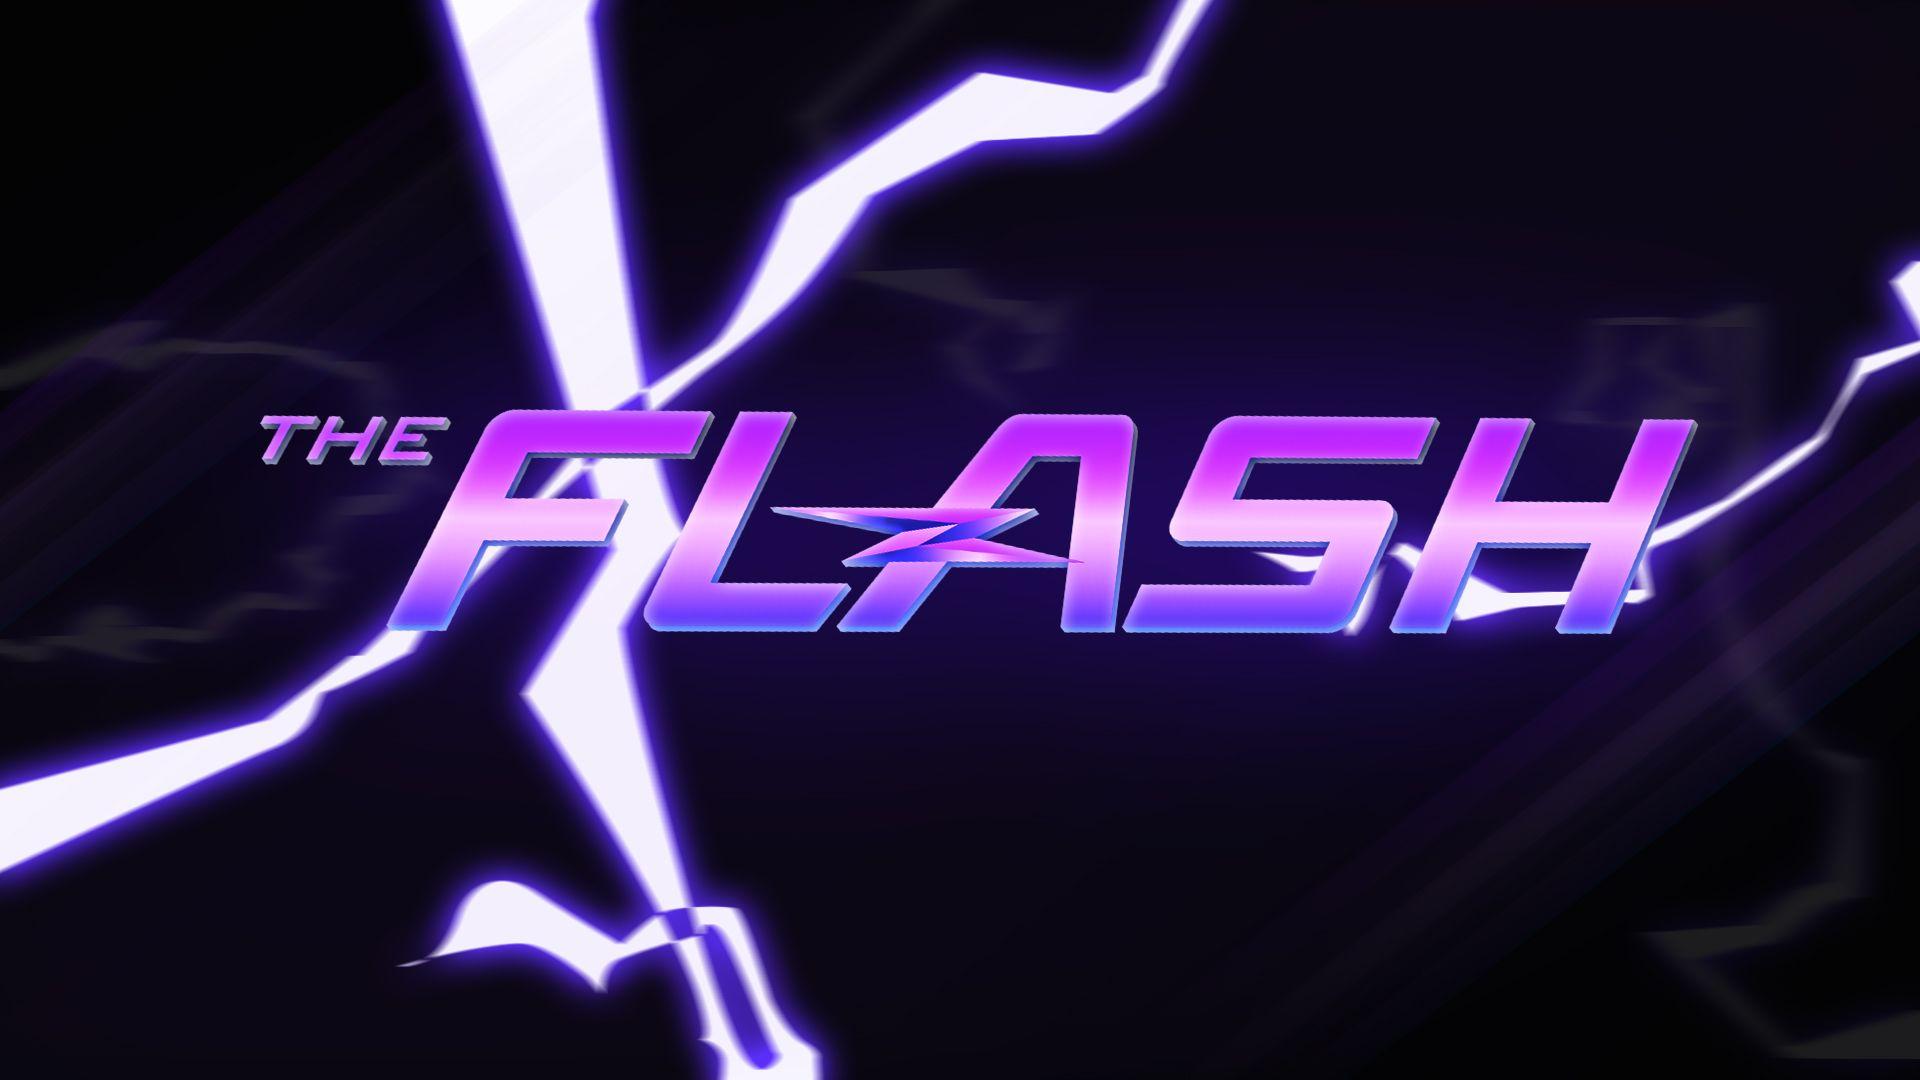 CW's The Flash Logo Desktop Wallpaper from the show intro